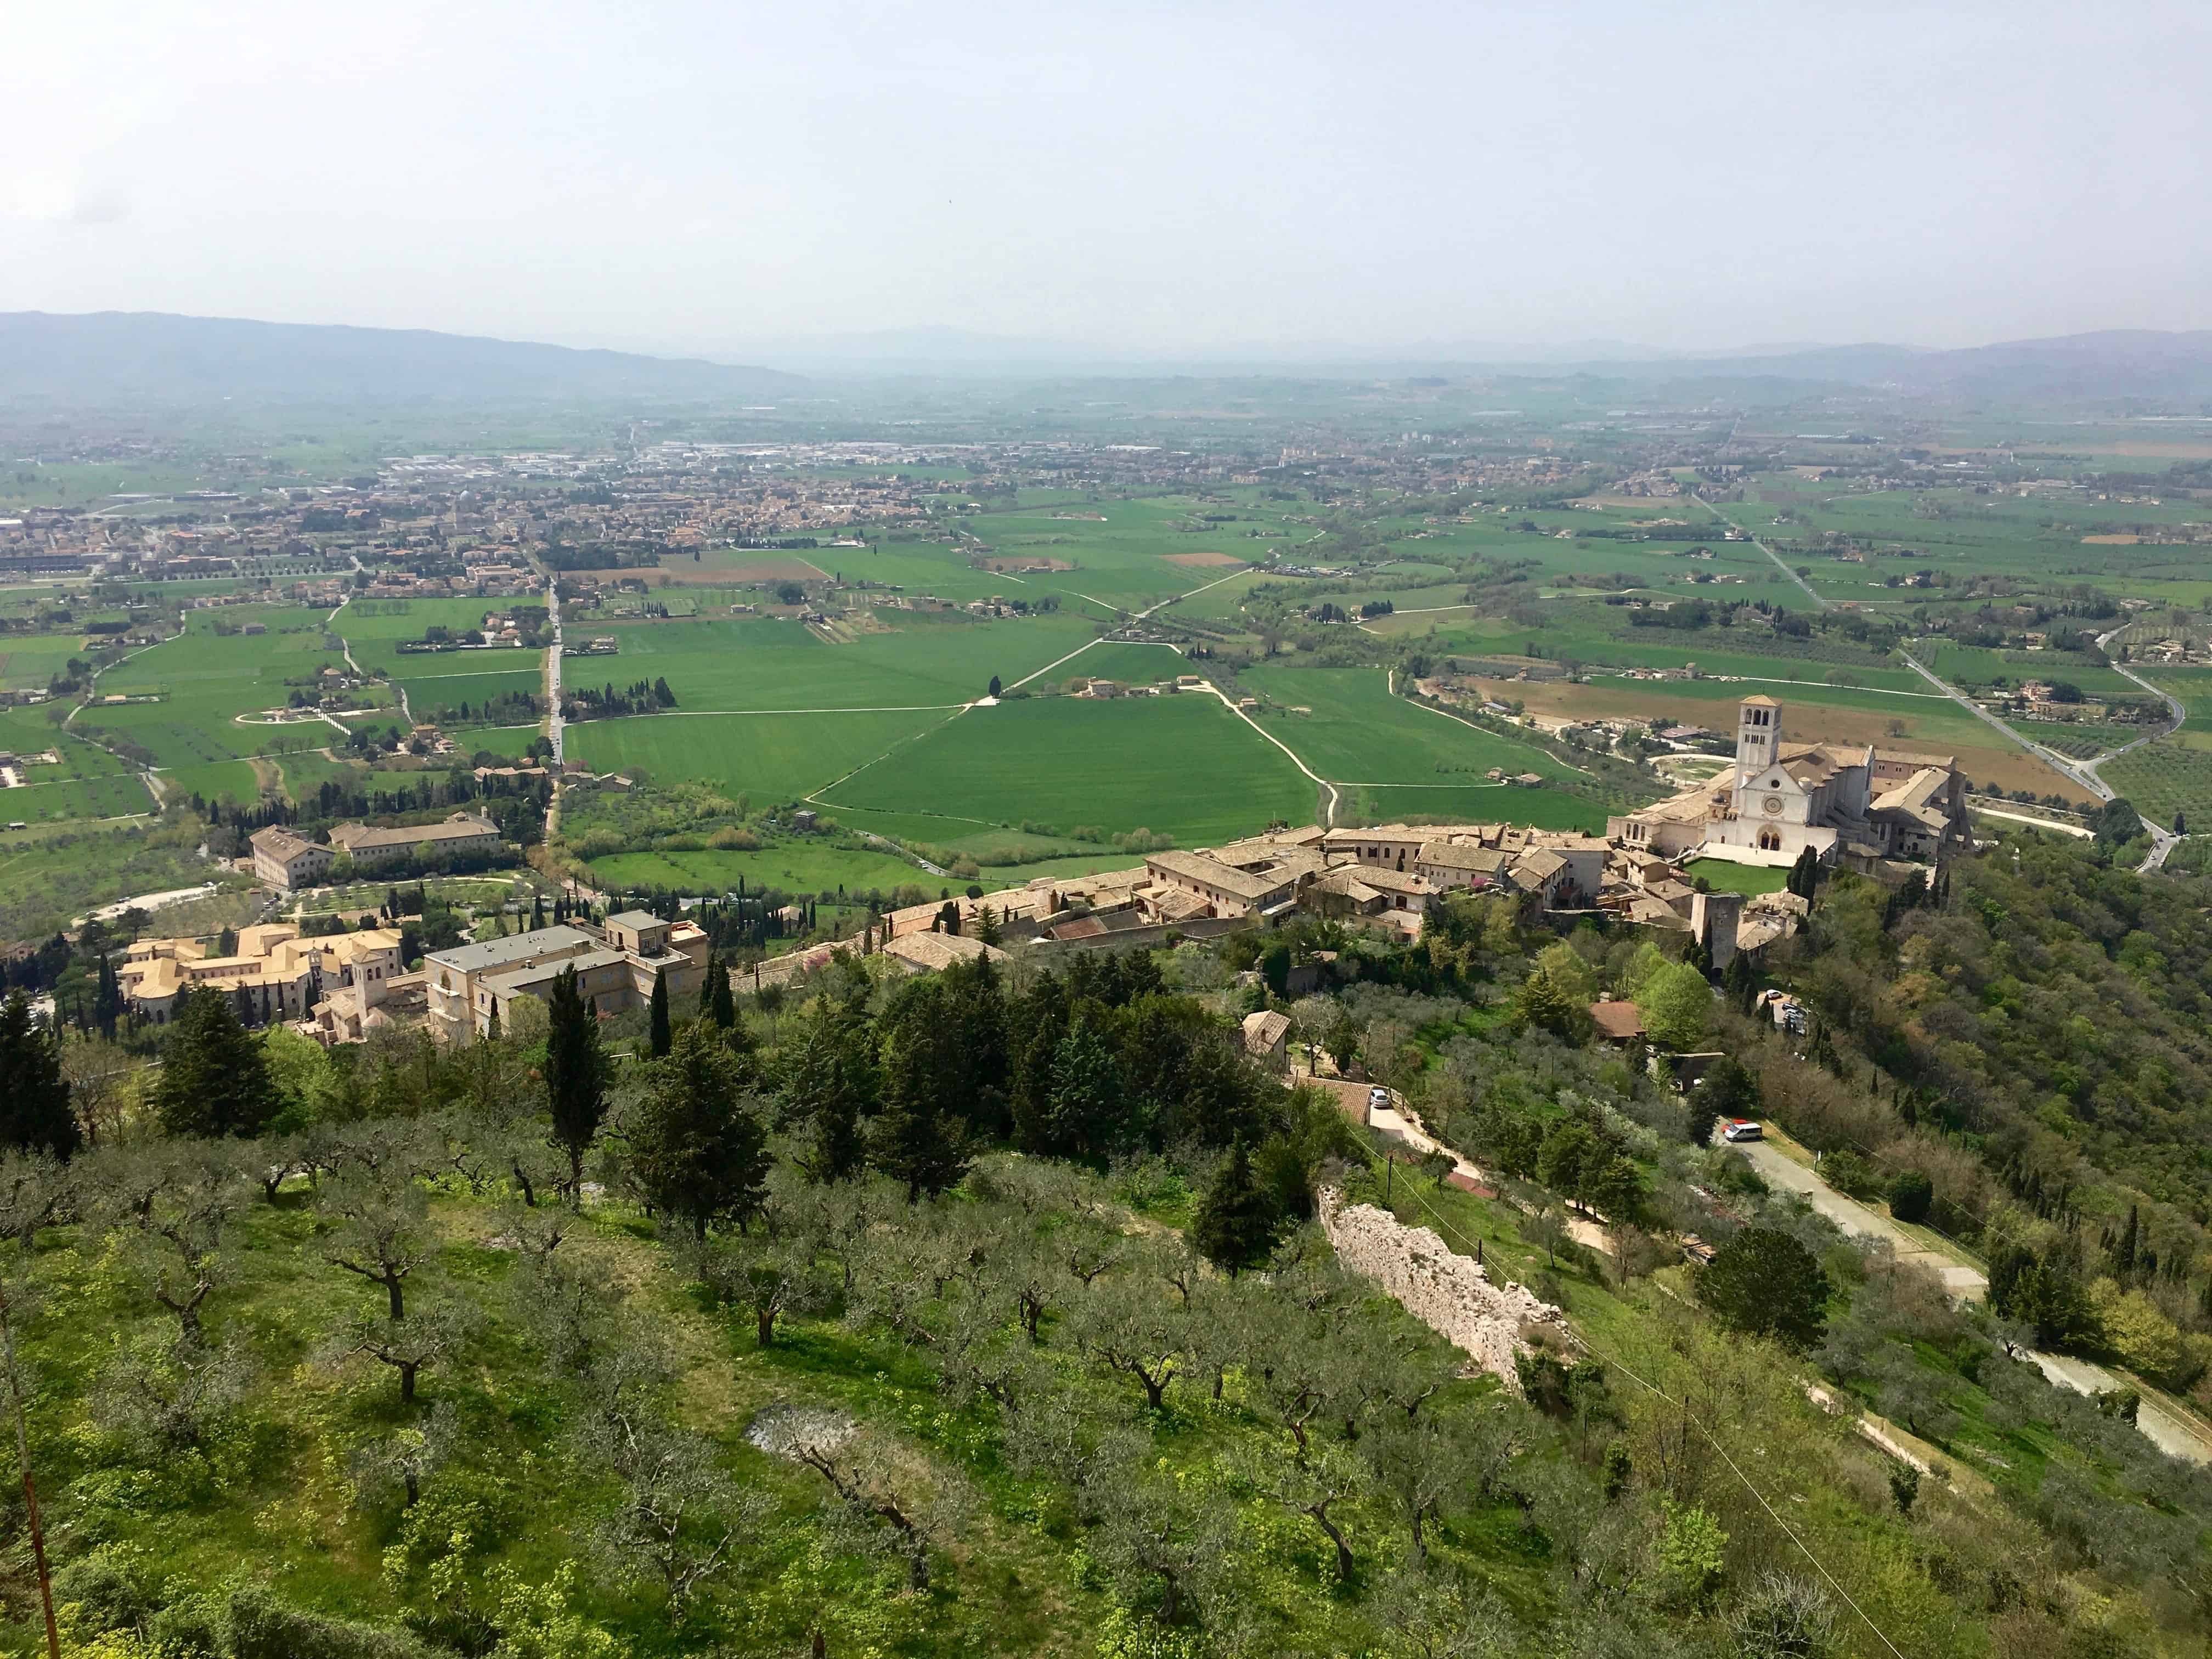 Views over Assisi and the valley below from the ramparts of the fortress Rocco Maggiore.